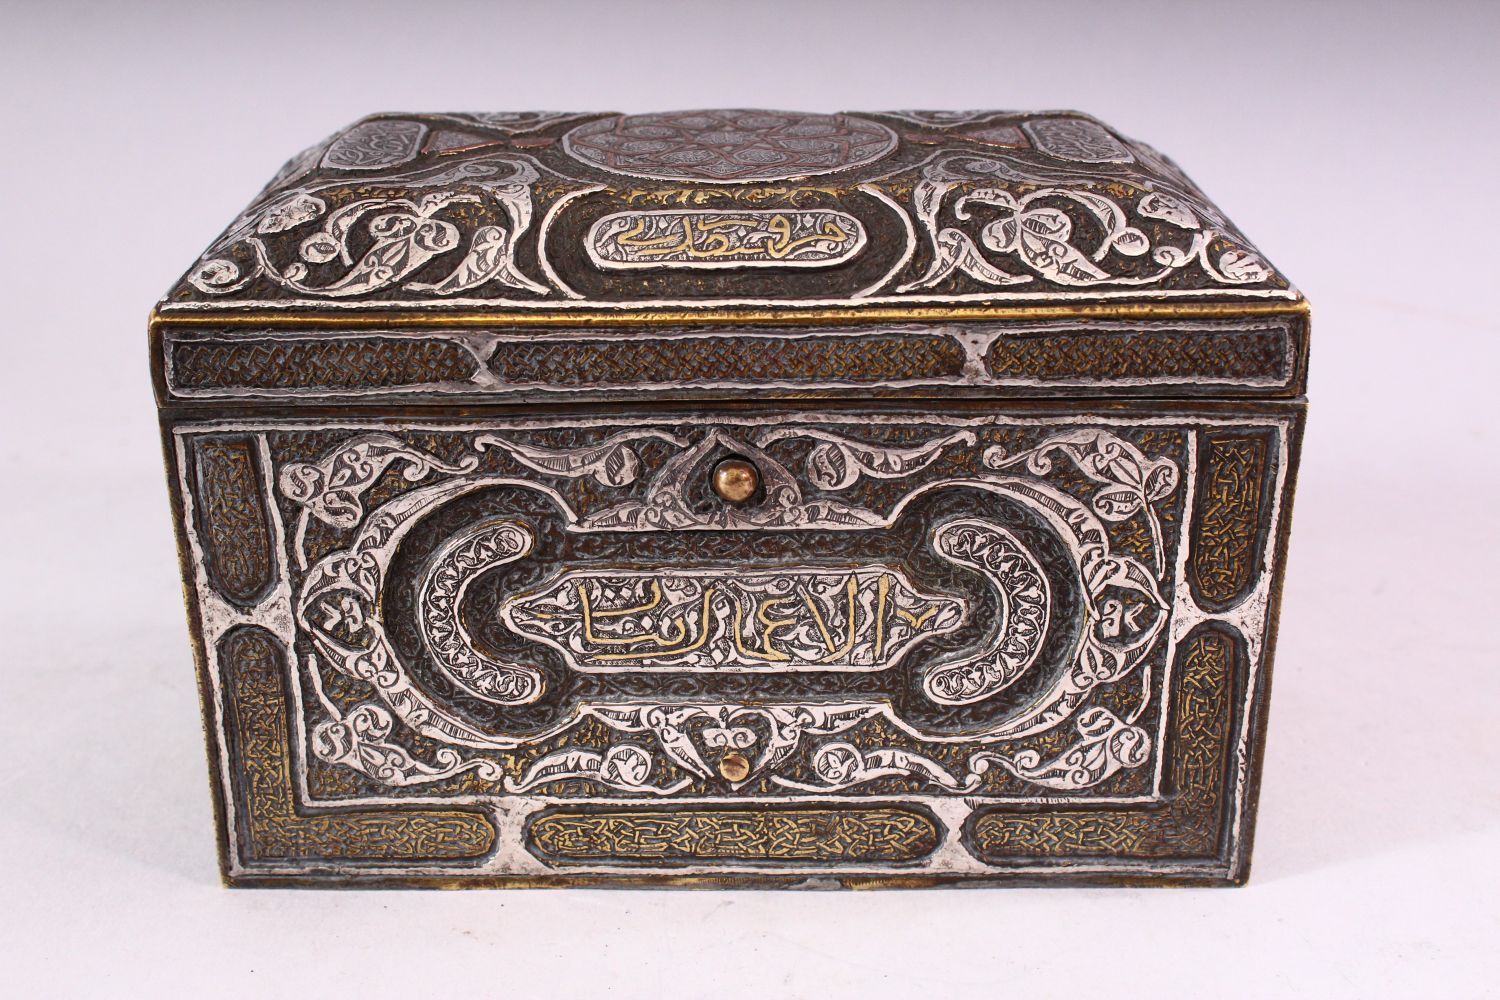 A GOOD 19TH CENTURY SYRIAN SILVER, COPPER AND BRASS RECTANGULAR CASKET, with panels of calligraphy - Image 2 of 10